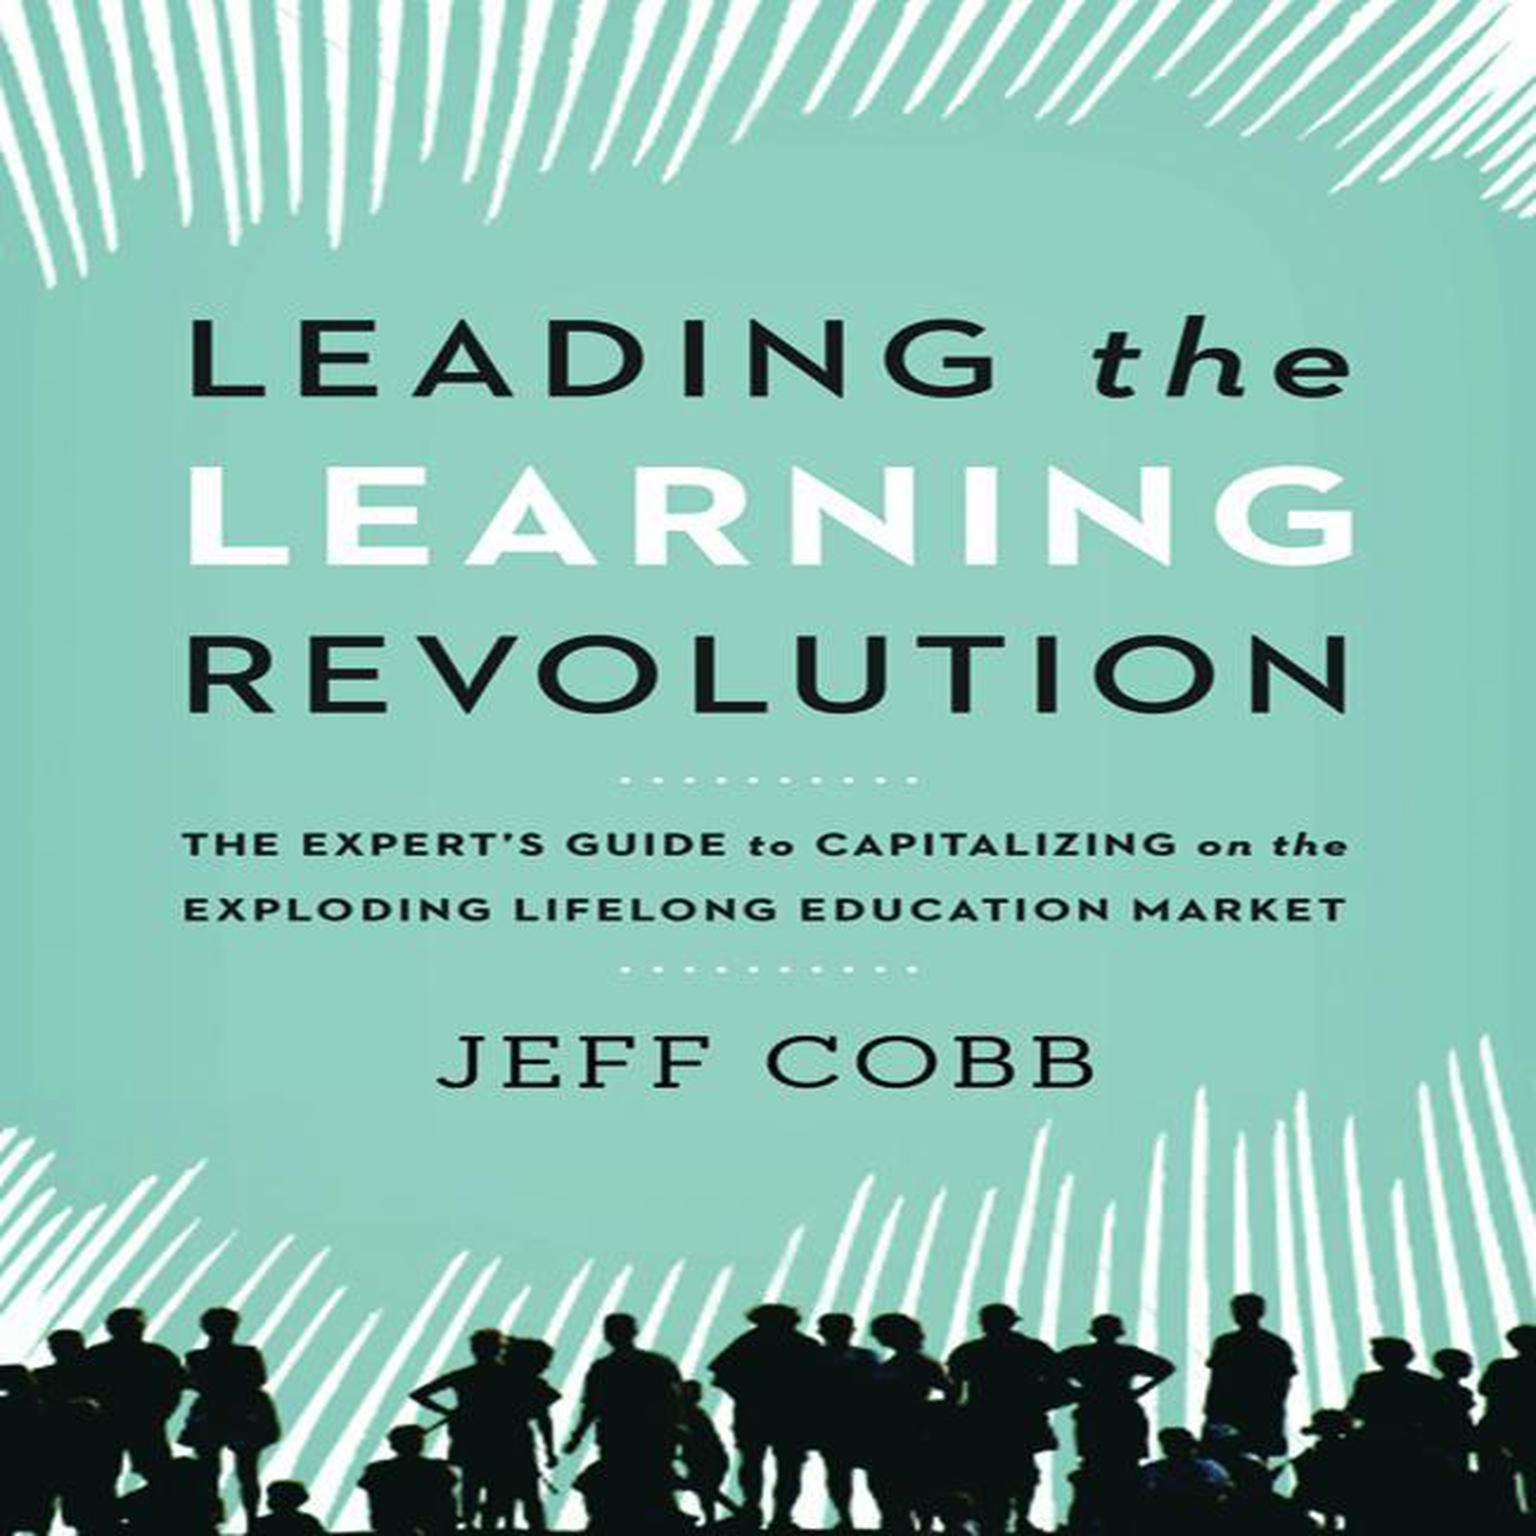 Leading the Learning Revolution: The Experts Guide to Capitalizing on the Exploding Lifelong Education Market Audiobook, by Jeff Cobb